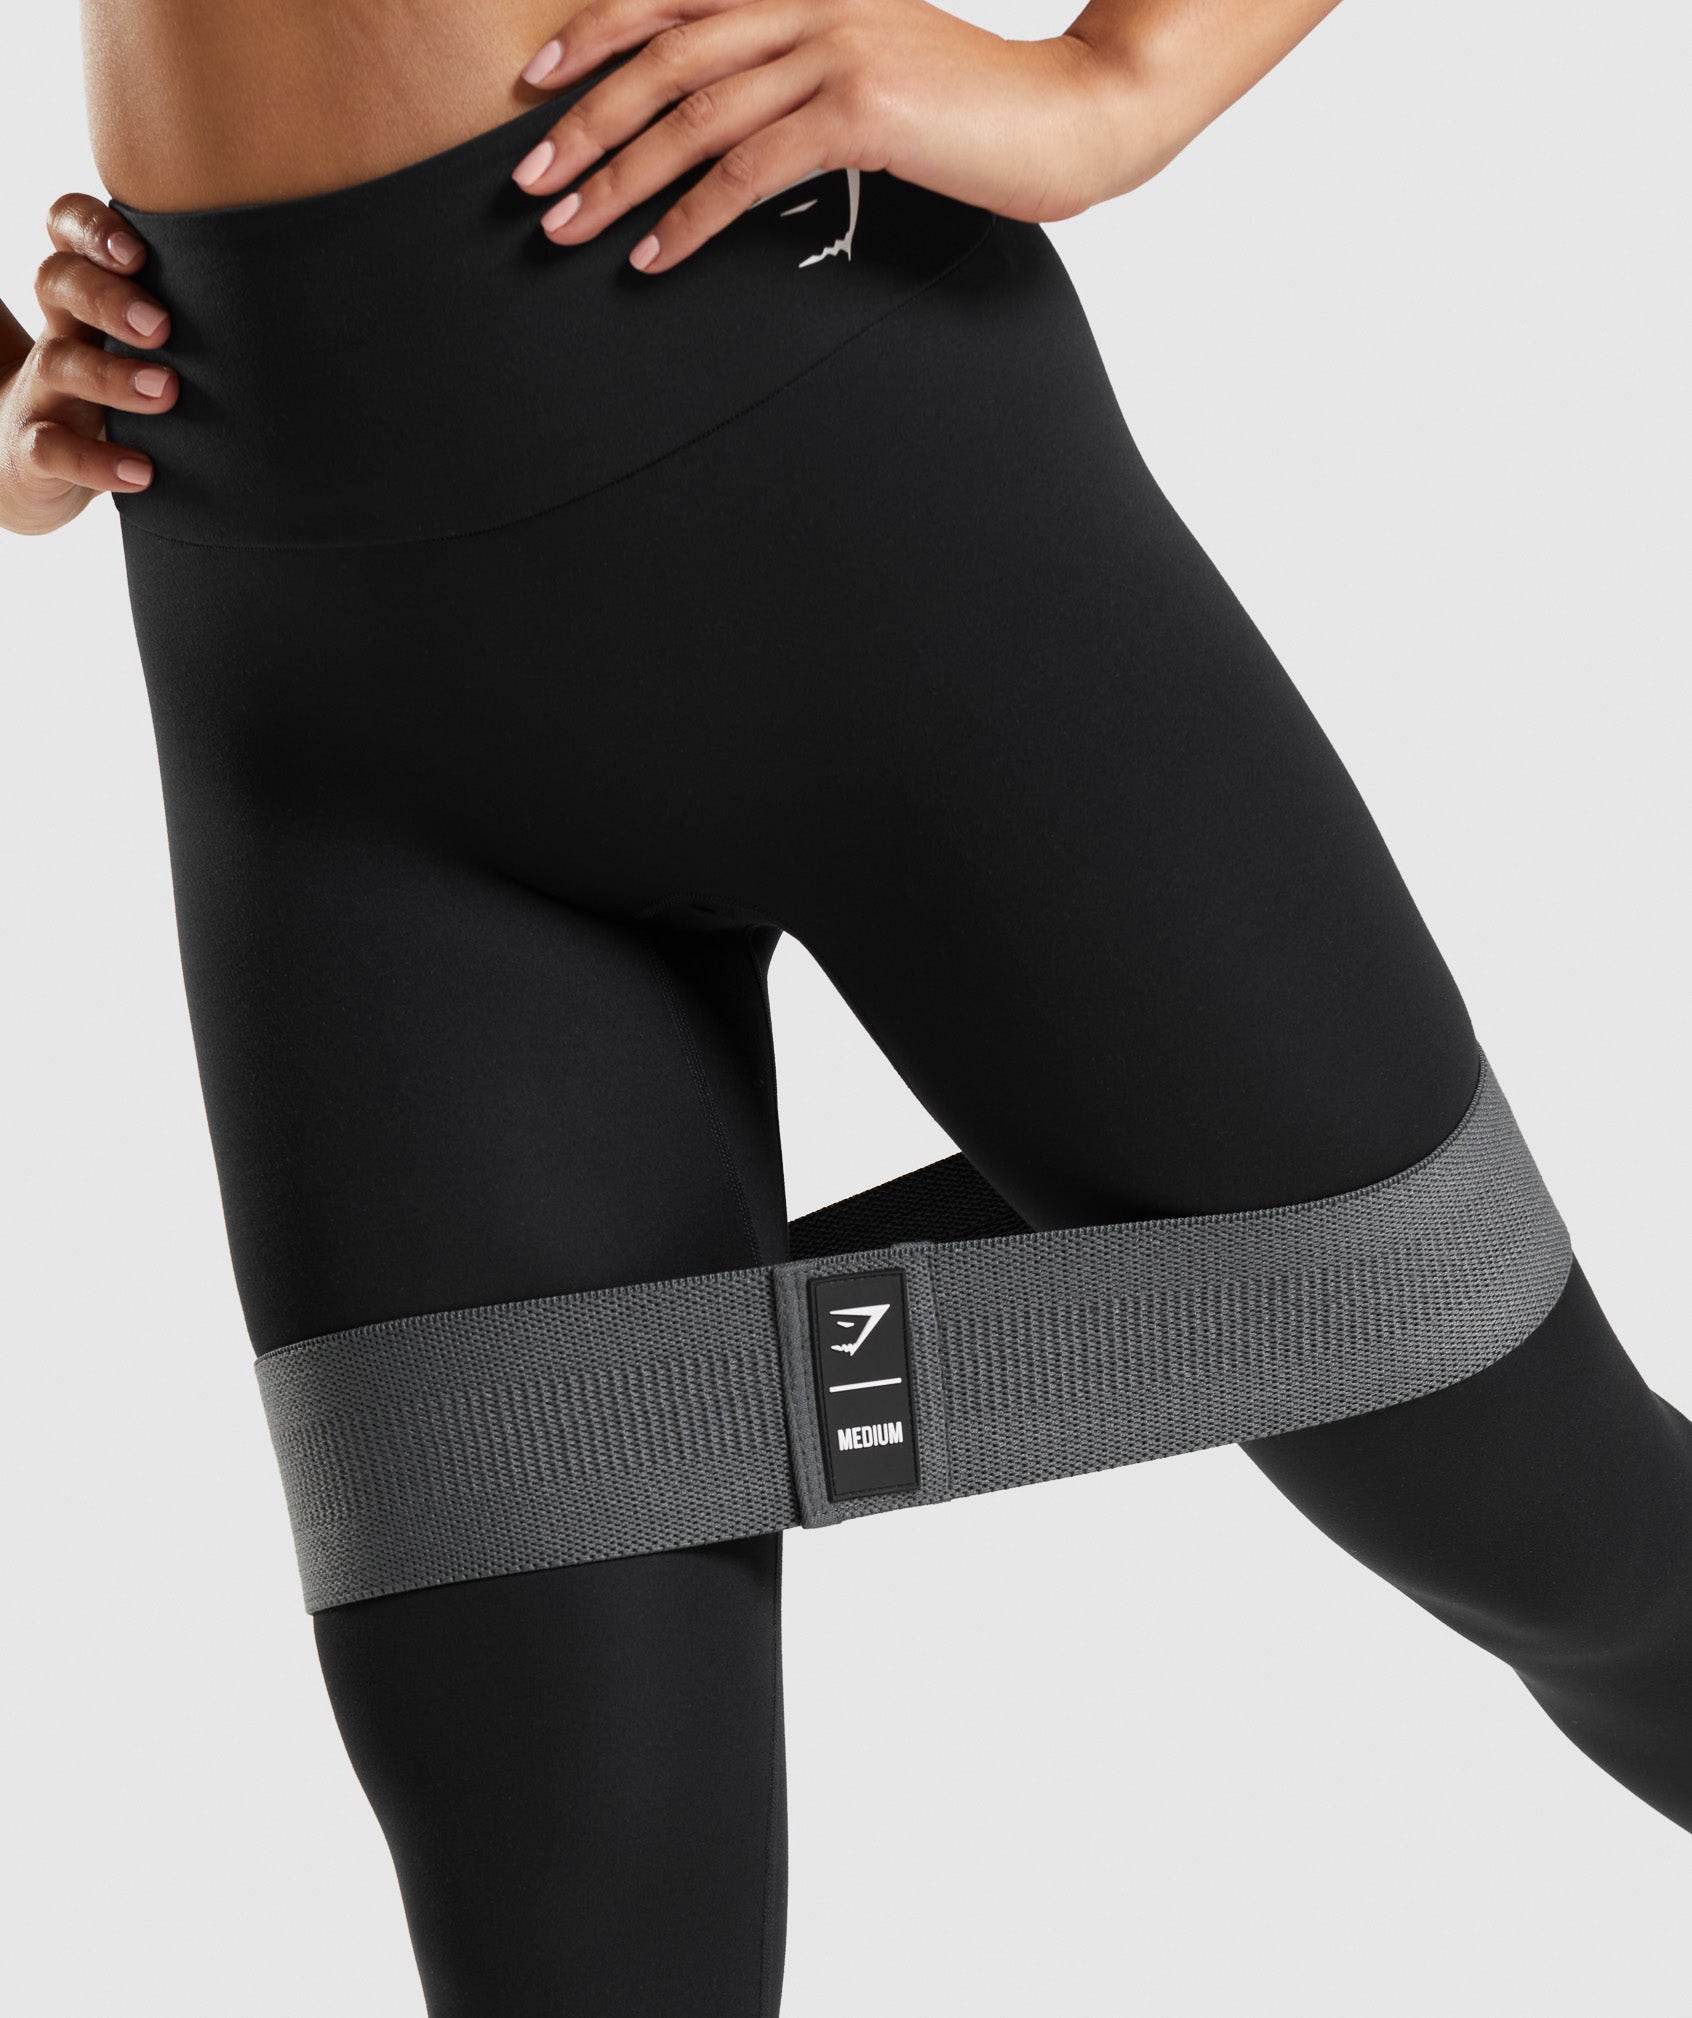 Medium Glute Band in Charcoal Grey - view 3